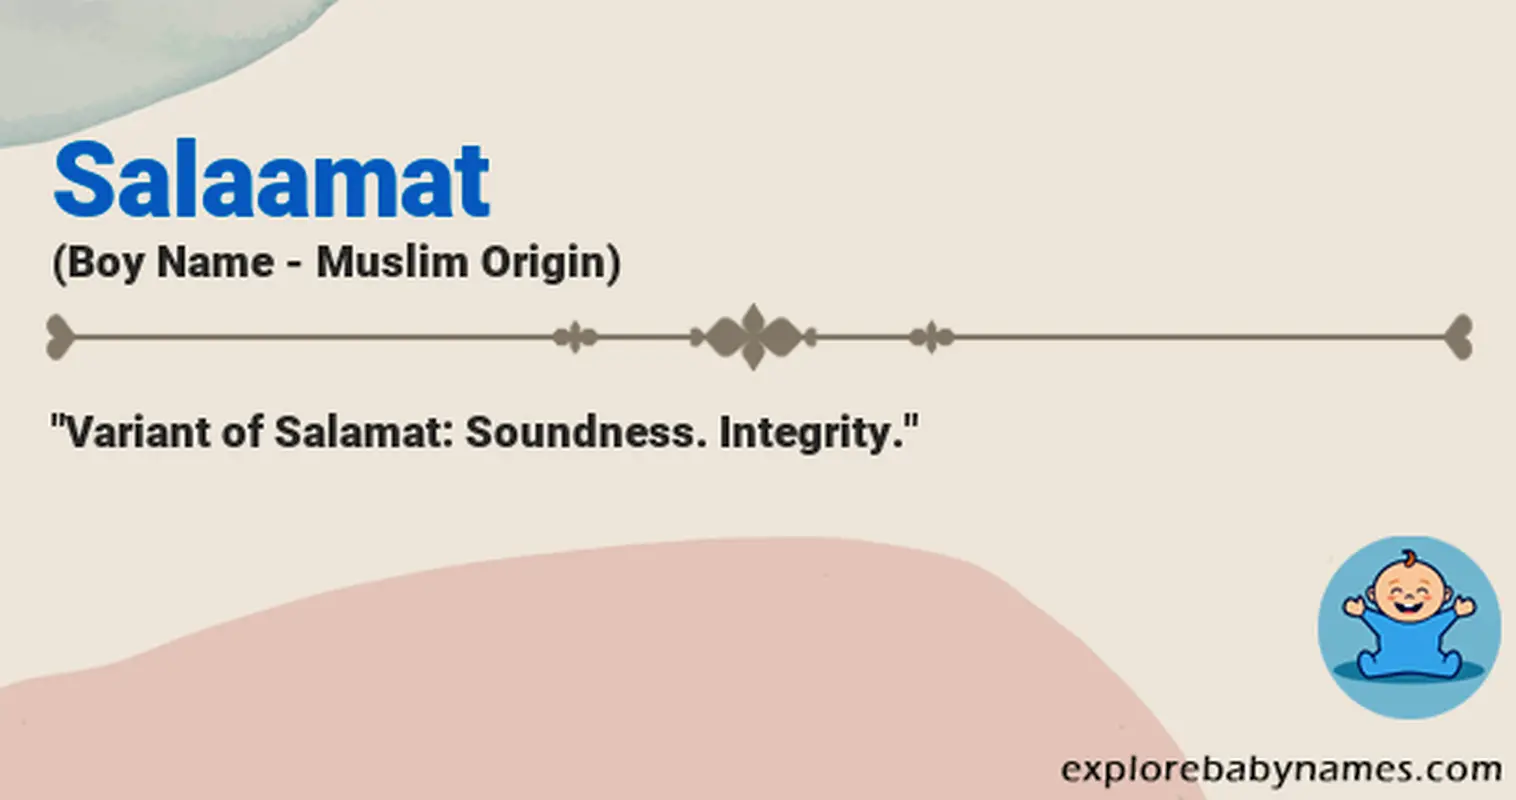 Meaning of Salaamat